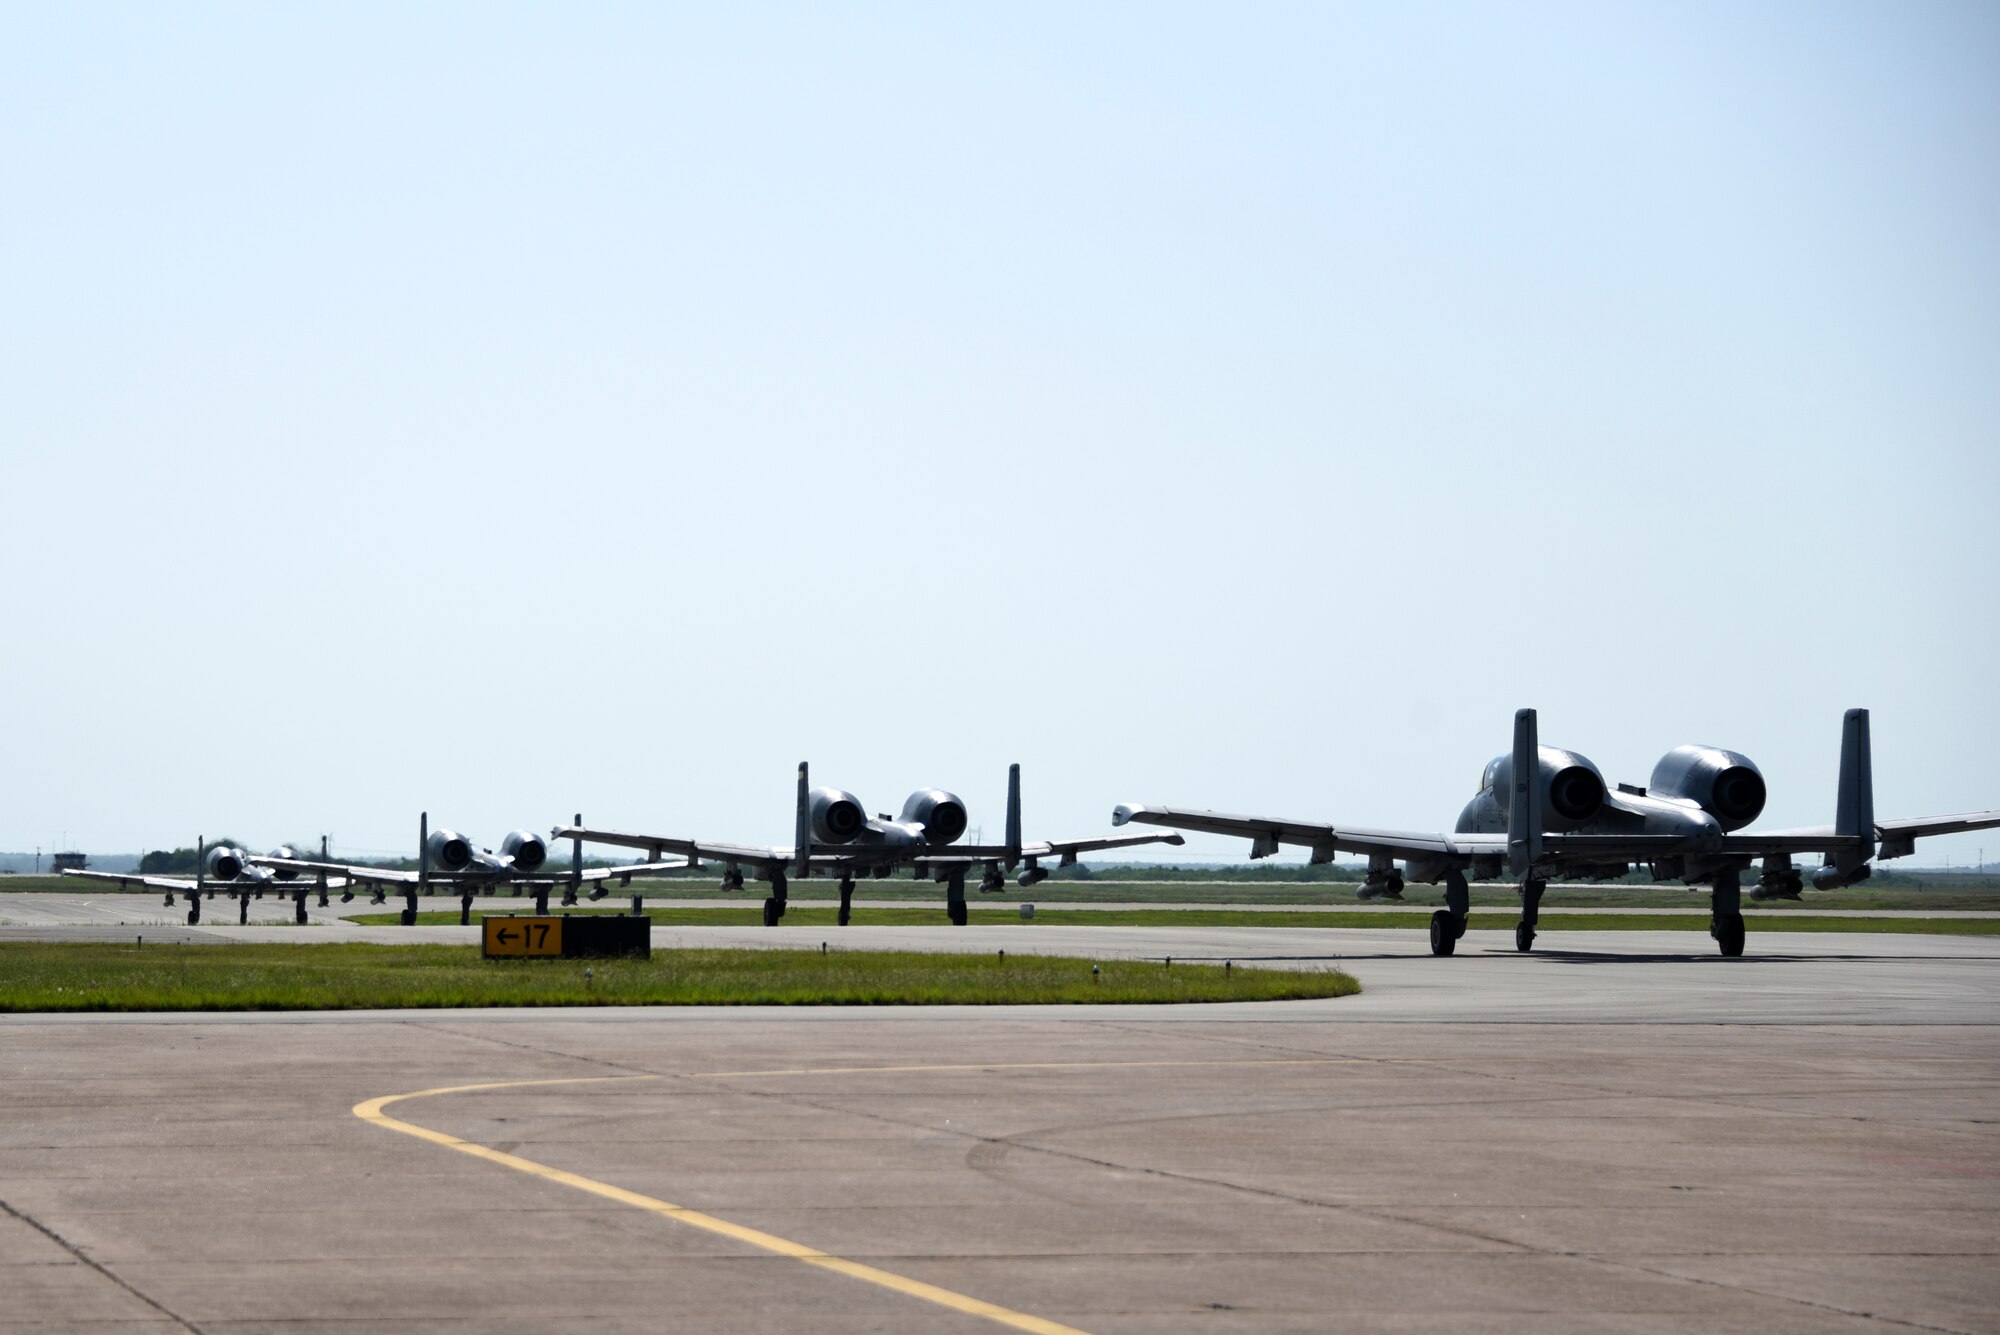 A-10s taxiing at Sheppard AFB